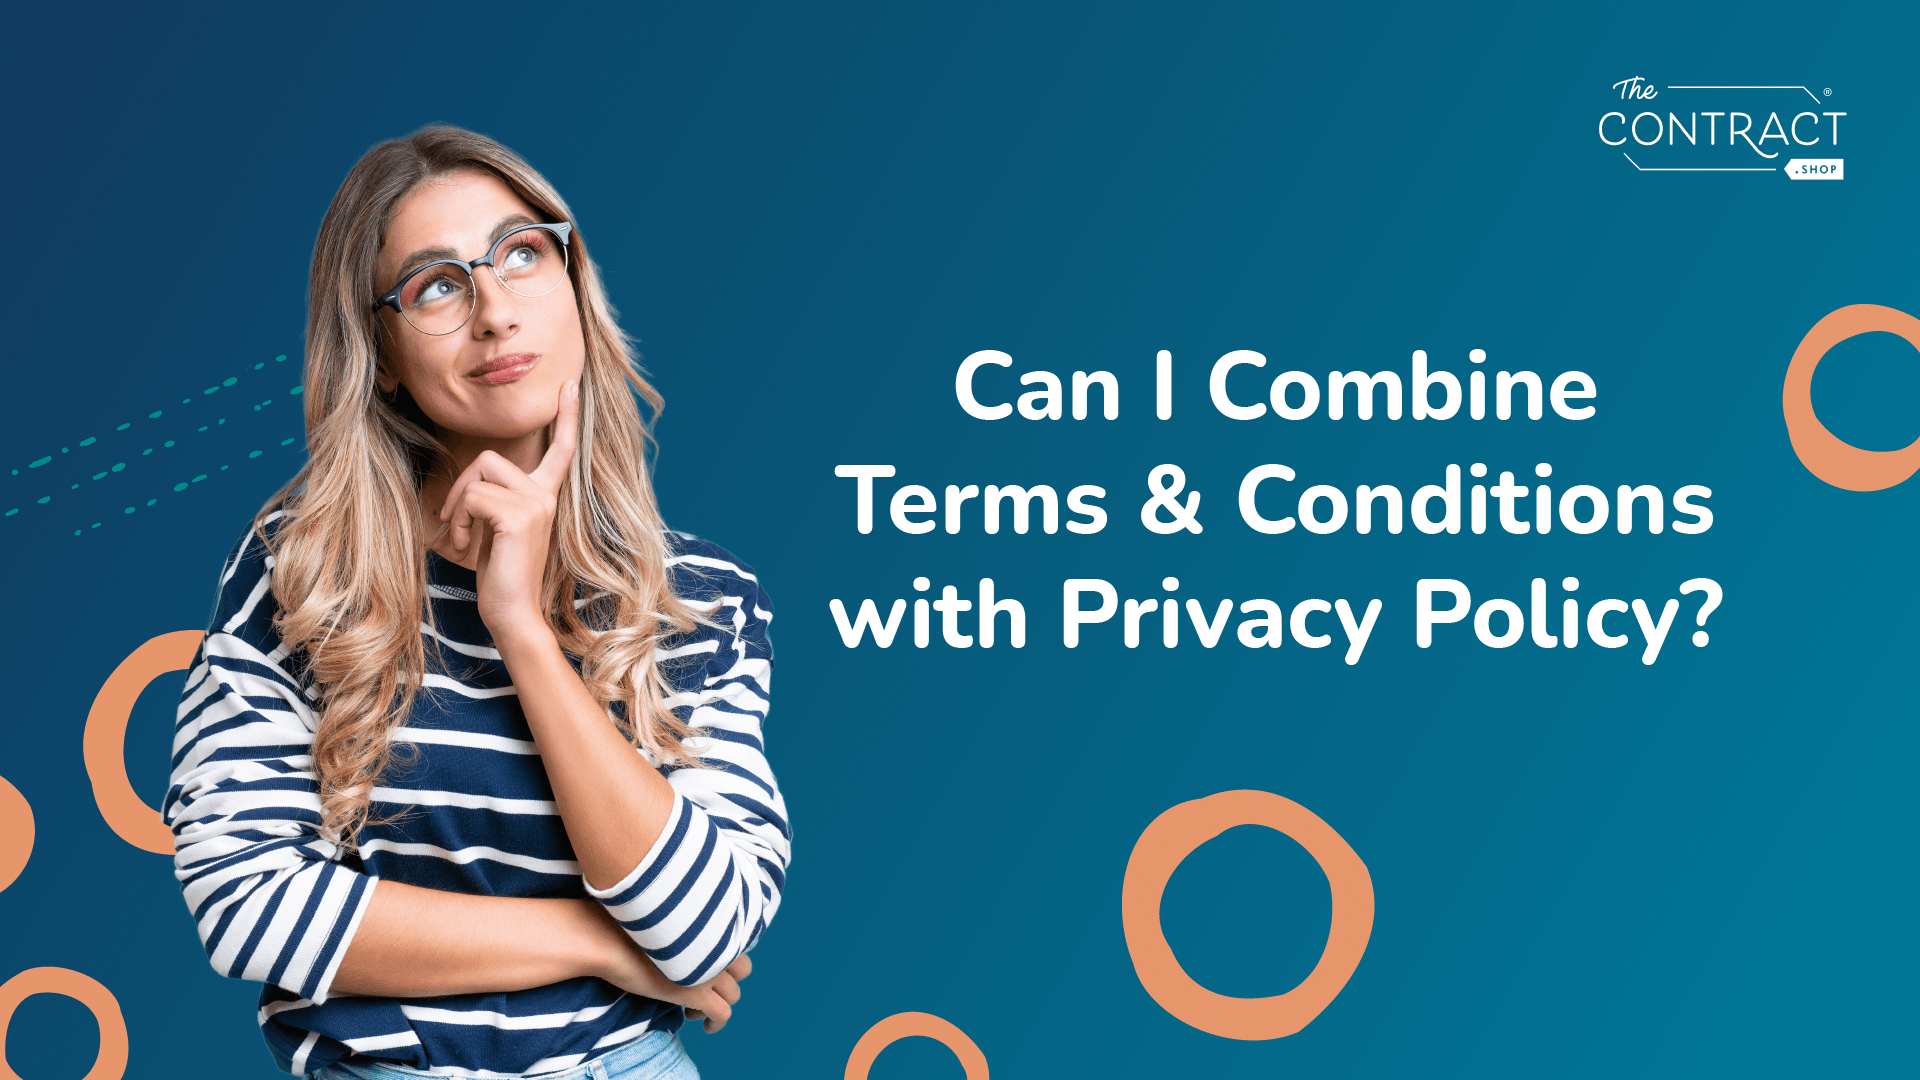 Can I Combine Terms & Conditions with Privacy Policy?